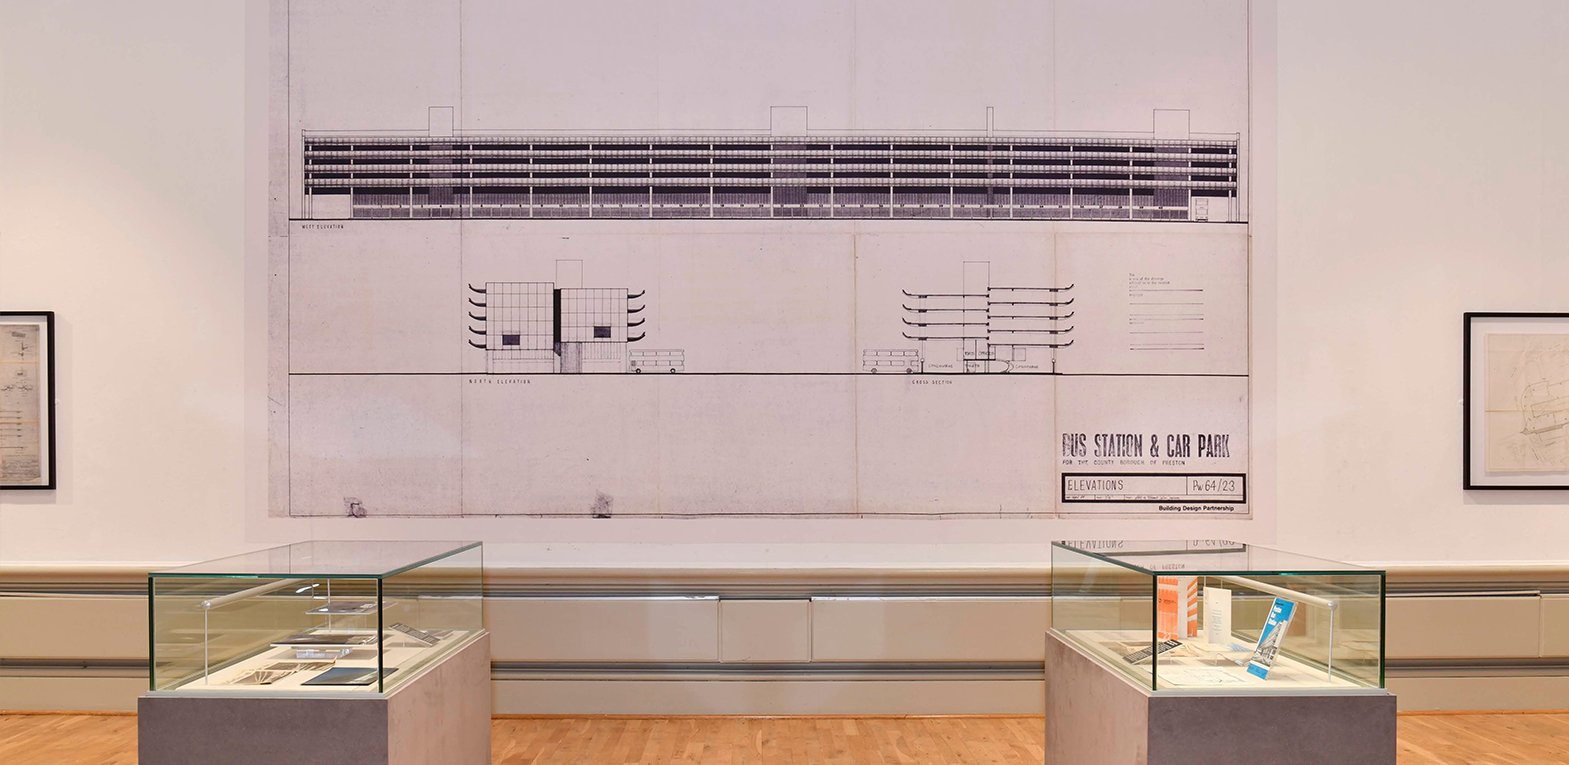 The exhibition in the Harris Museum. Artifacts from the bus station in display cases including models, pamphlets and the digital portion of the original clock. They are in front of a wall display of plans and architectural drawings.